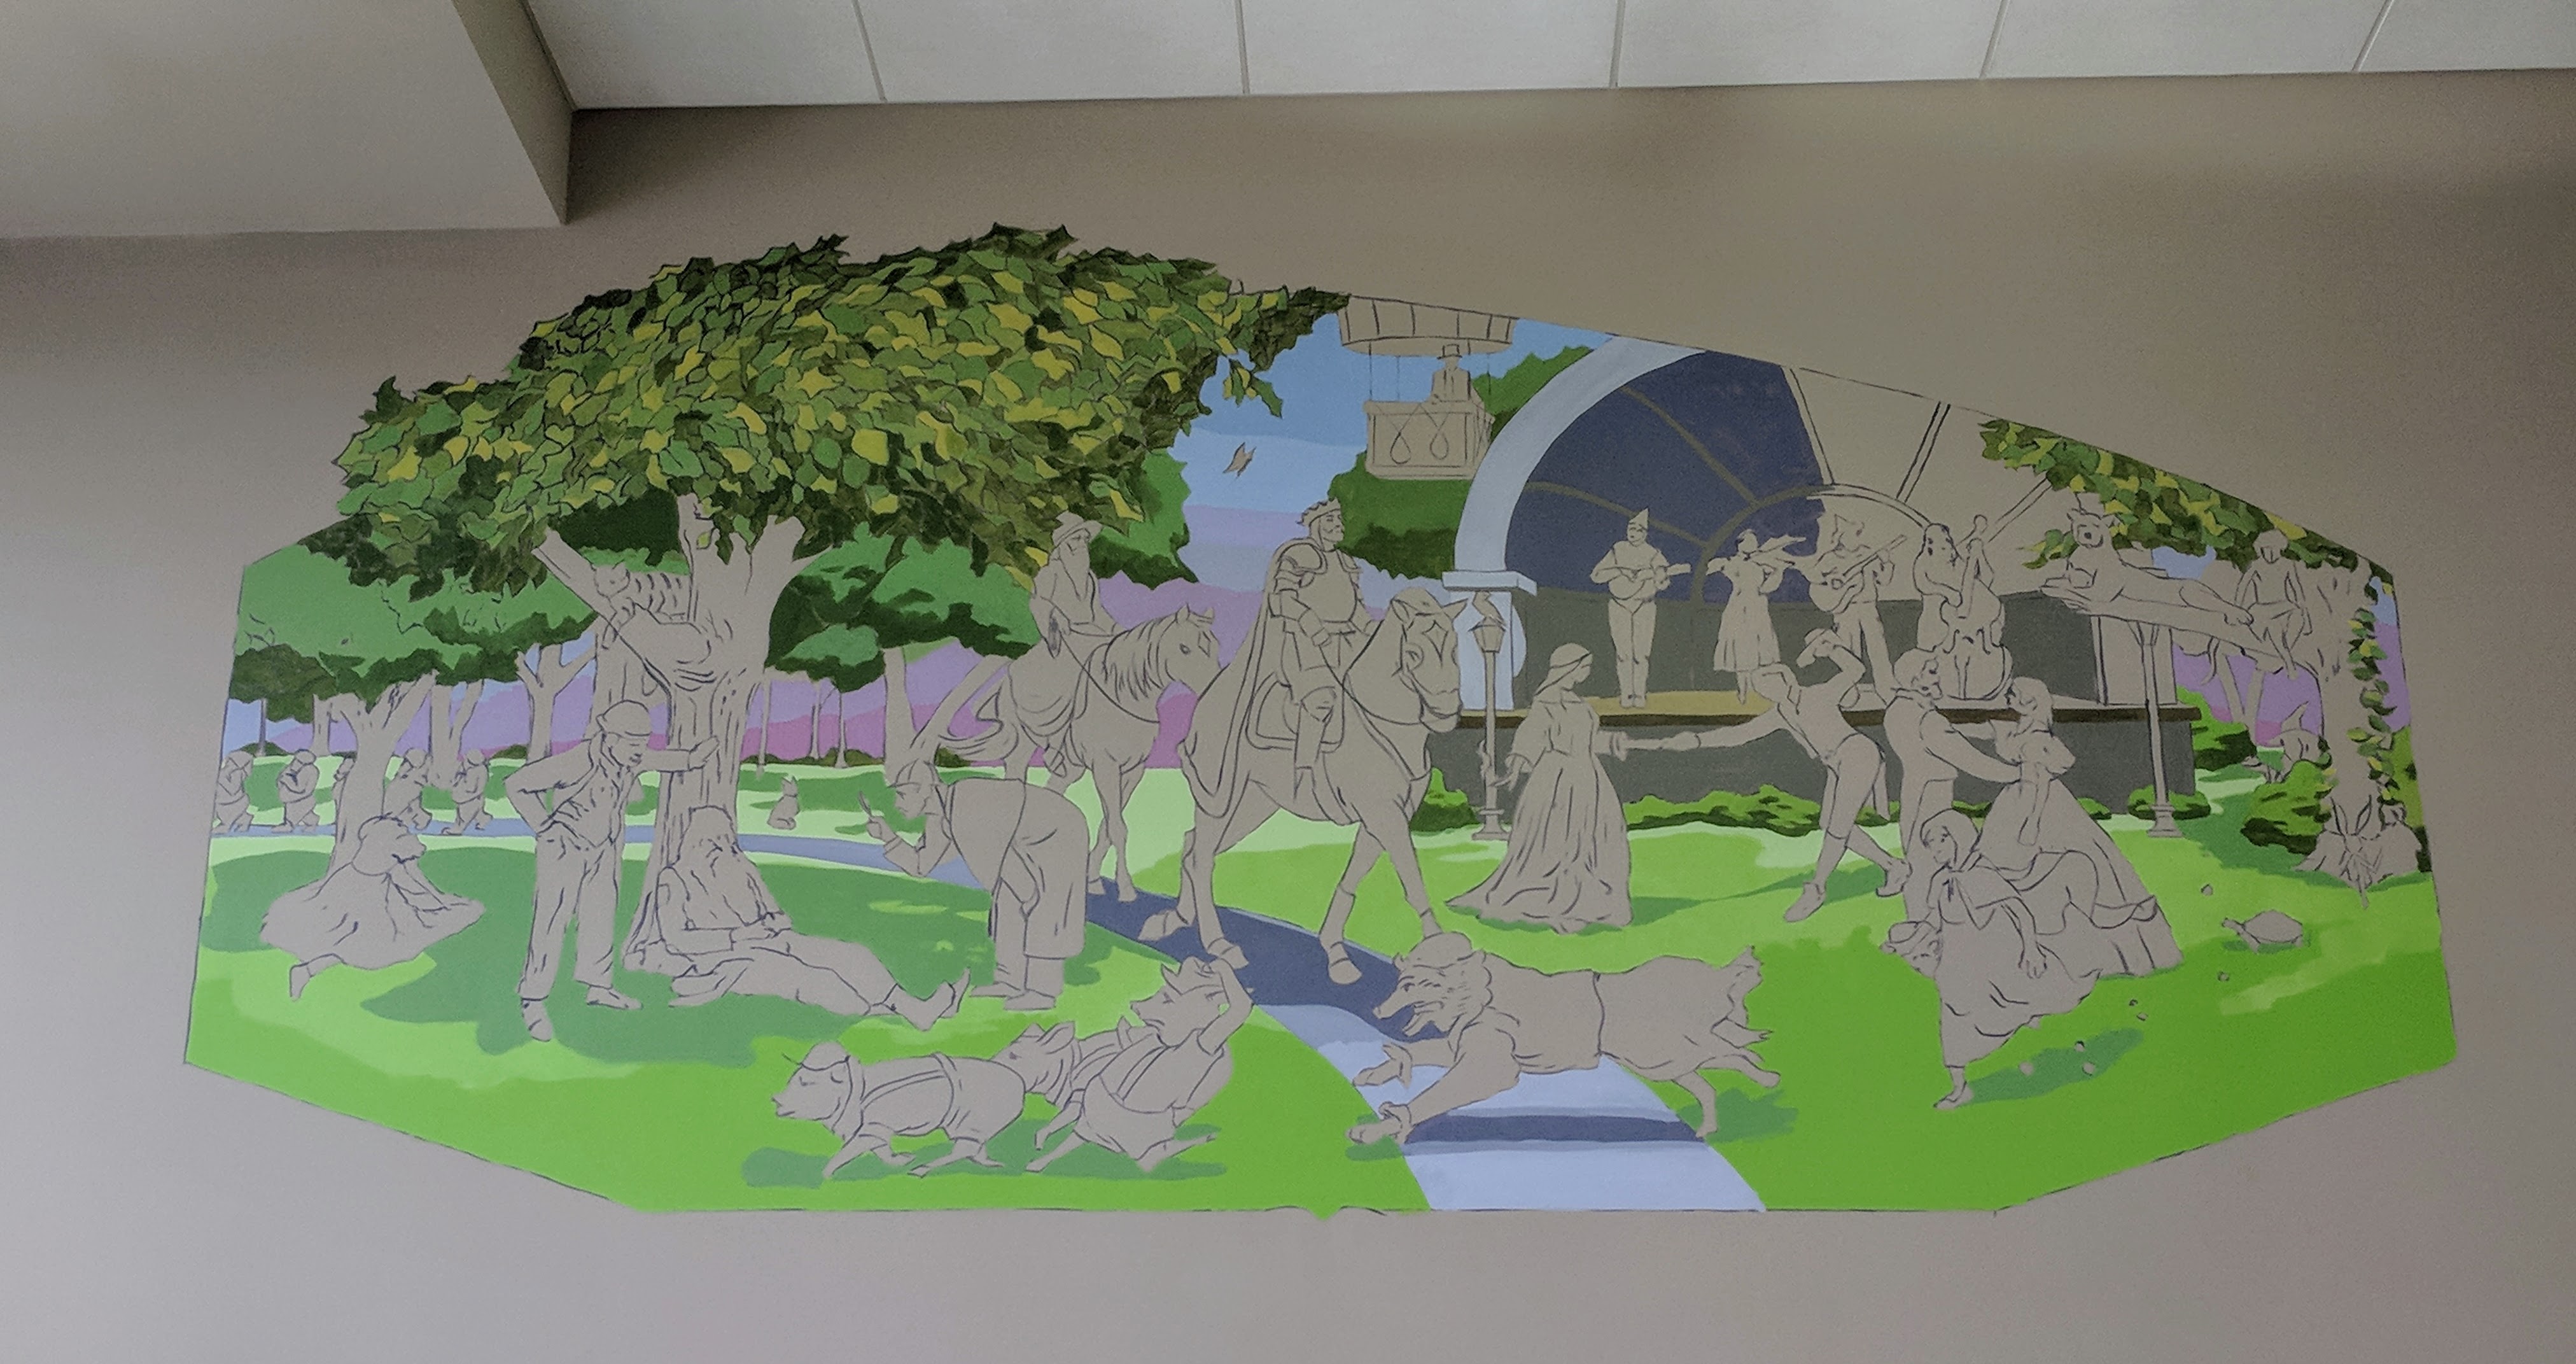 Partially completed mural with background elements painted